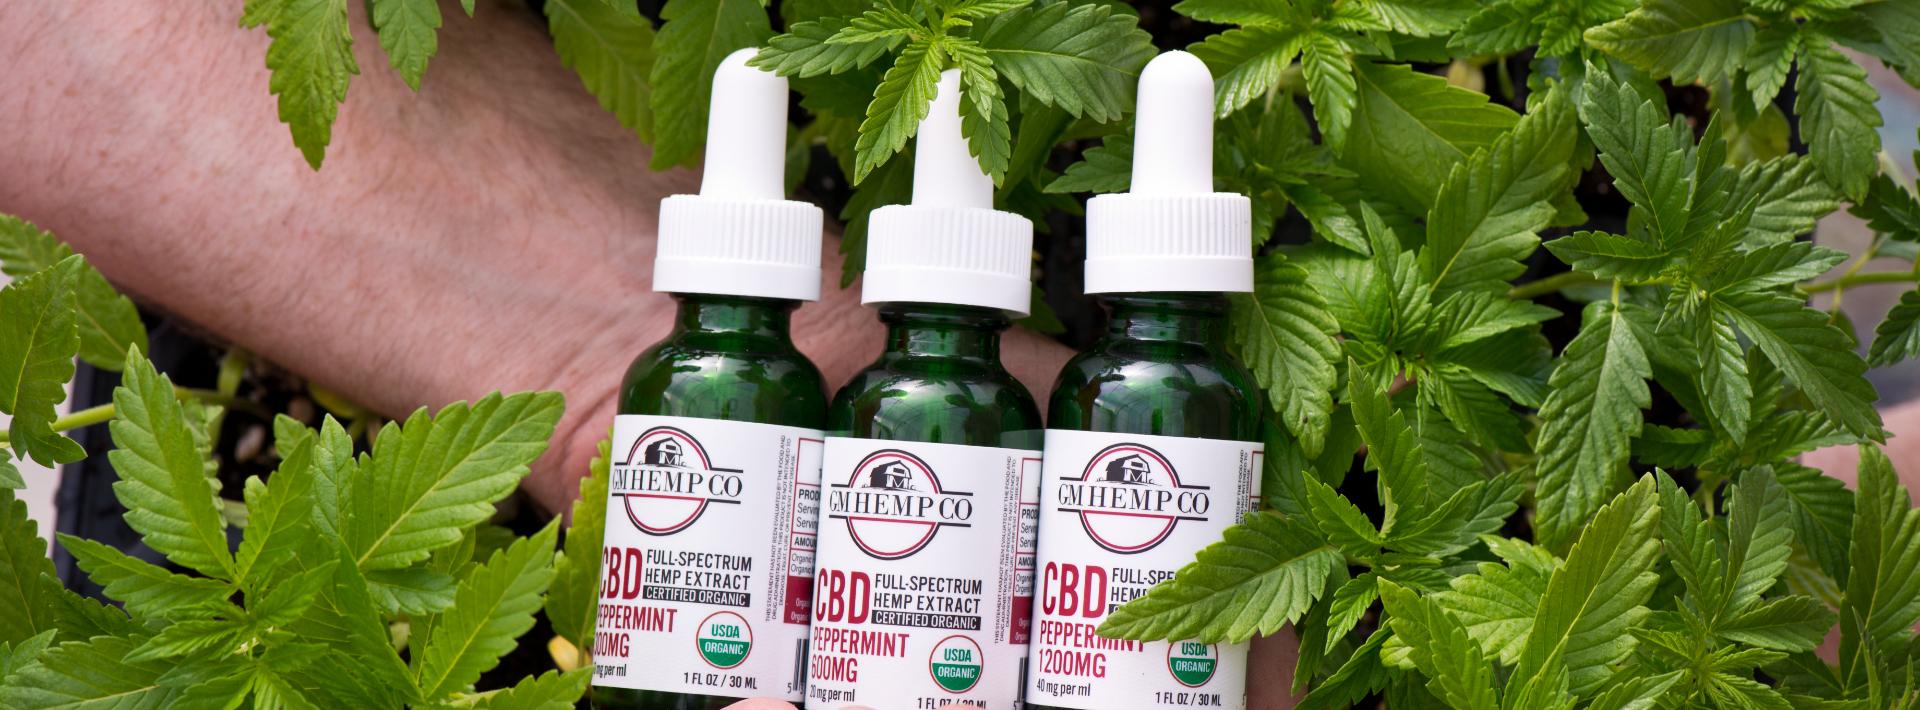 Product Retailers See Promise In CBD | Online CBD Shop | Simple, Pure, All Natural CBD image